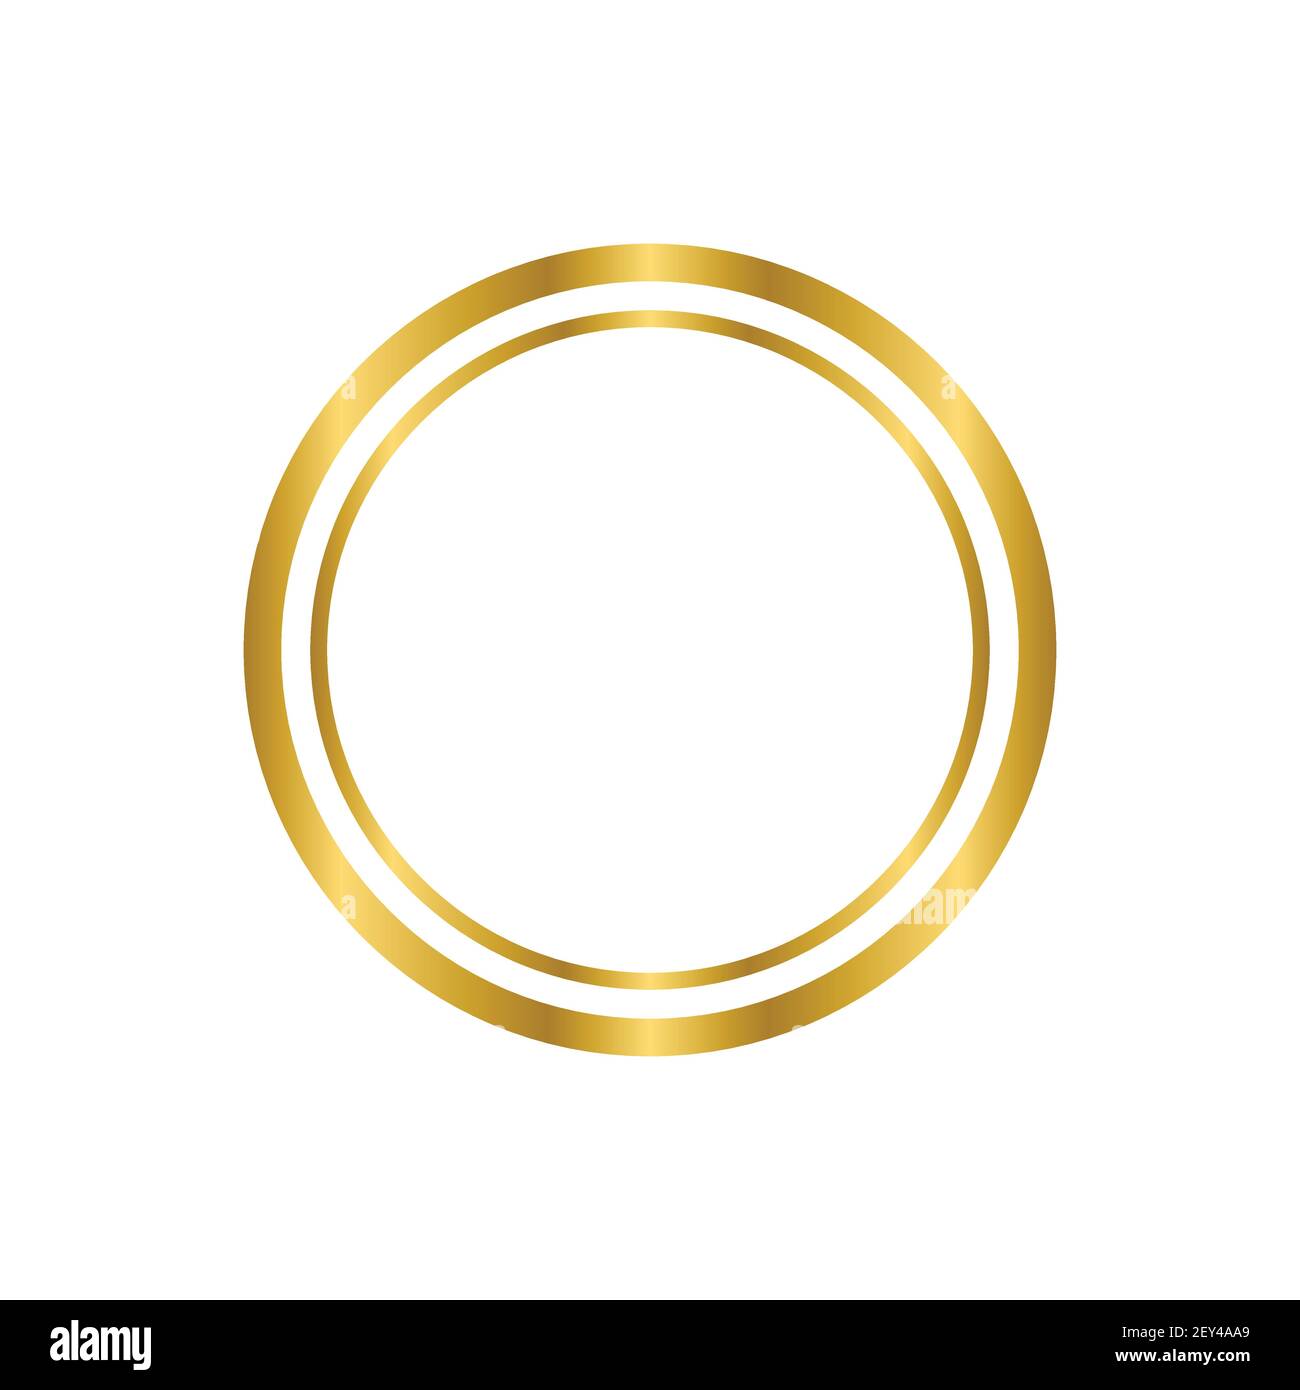 Gold Shiny Glowing Vintage Circle Frame With Shadows Isolated On White Background Gold Realistic Square Border Vector Illustration 2EY4AA9 